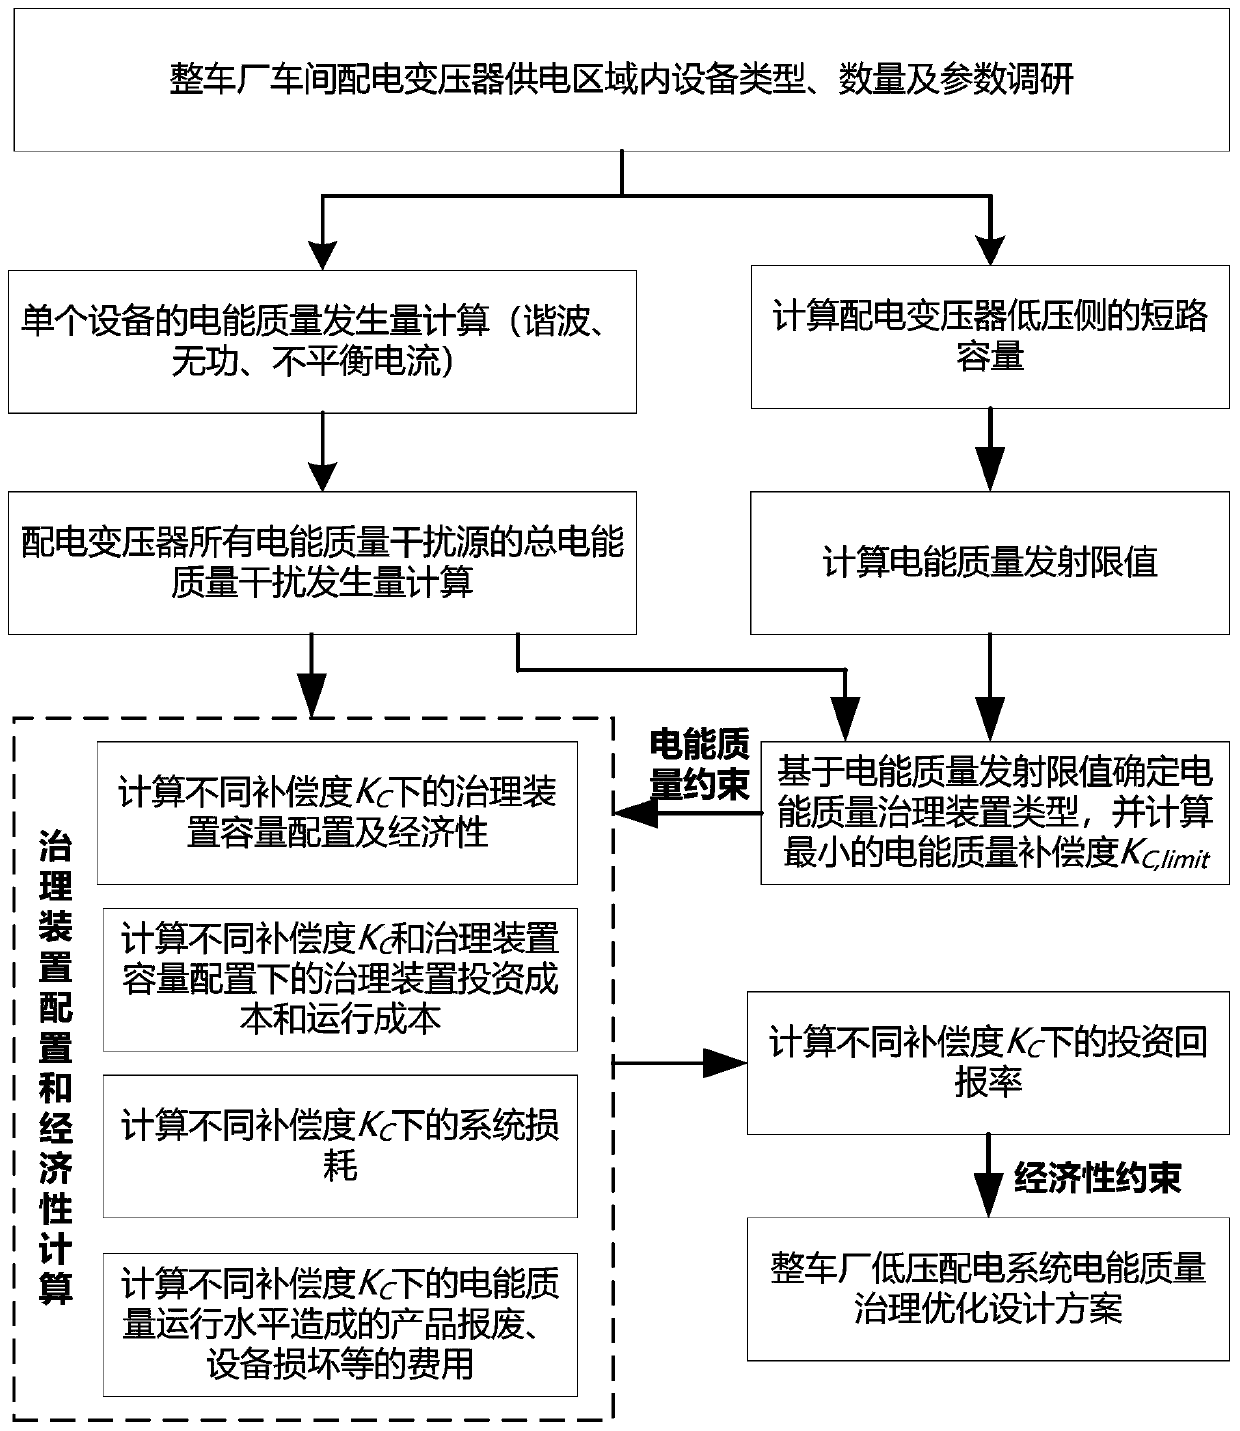 Power quality governance optimization method for low-voltage power distribution system of finished automobile factory